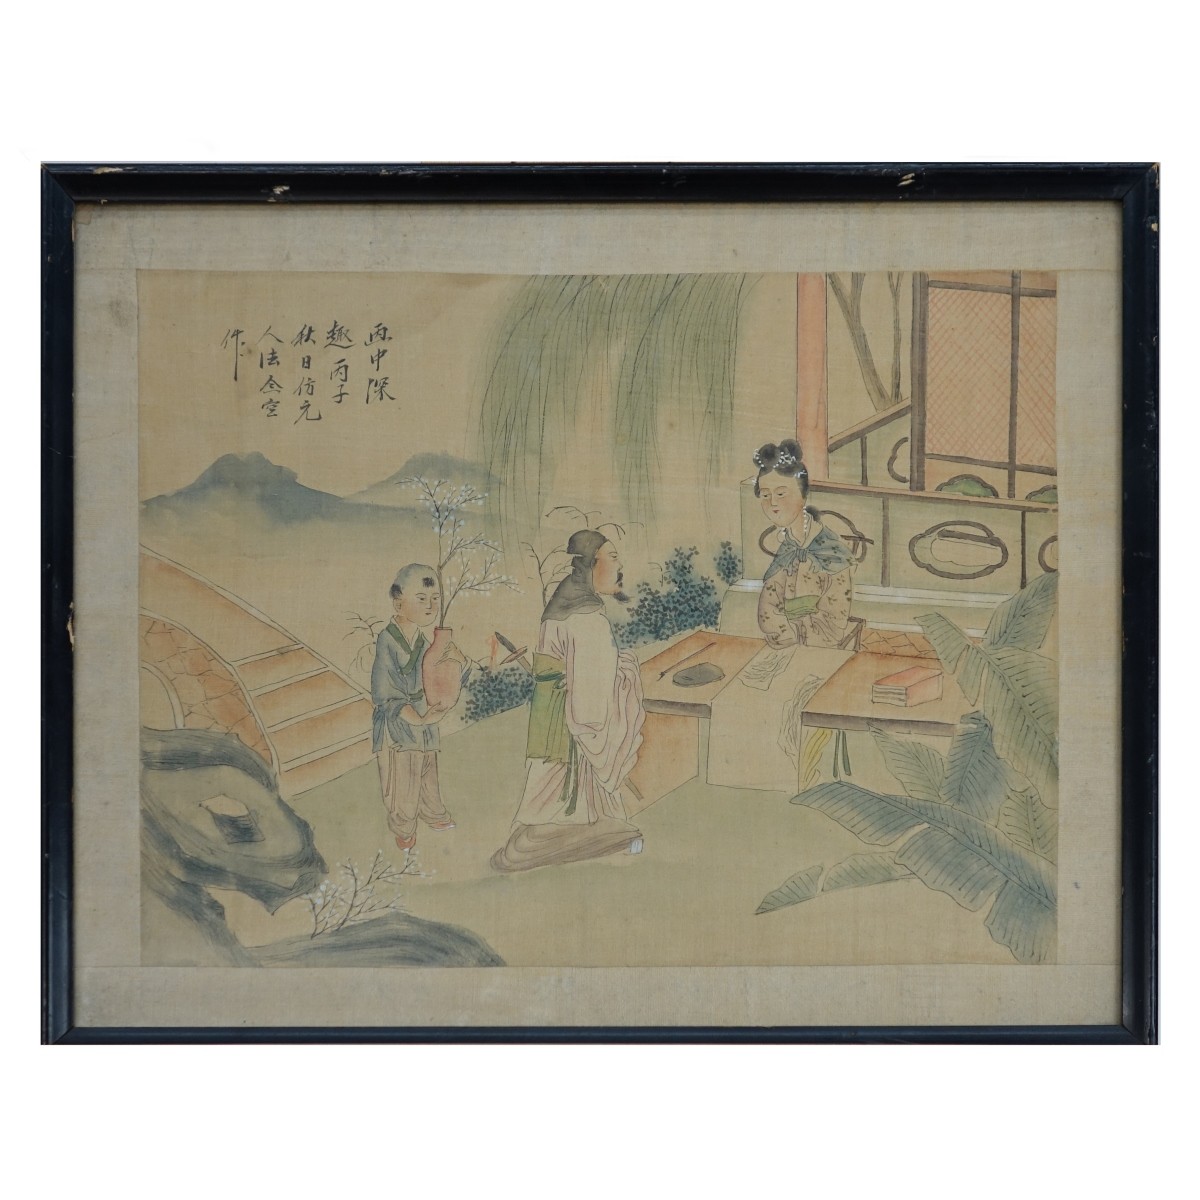 Chinese Scroll Painting on Silk